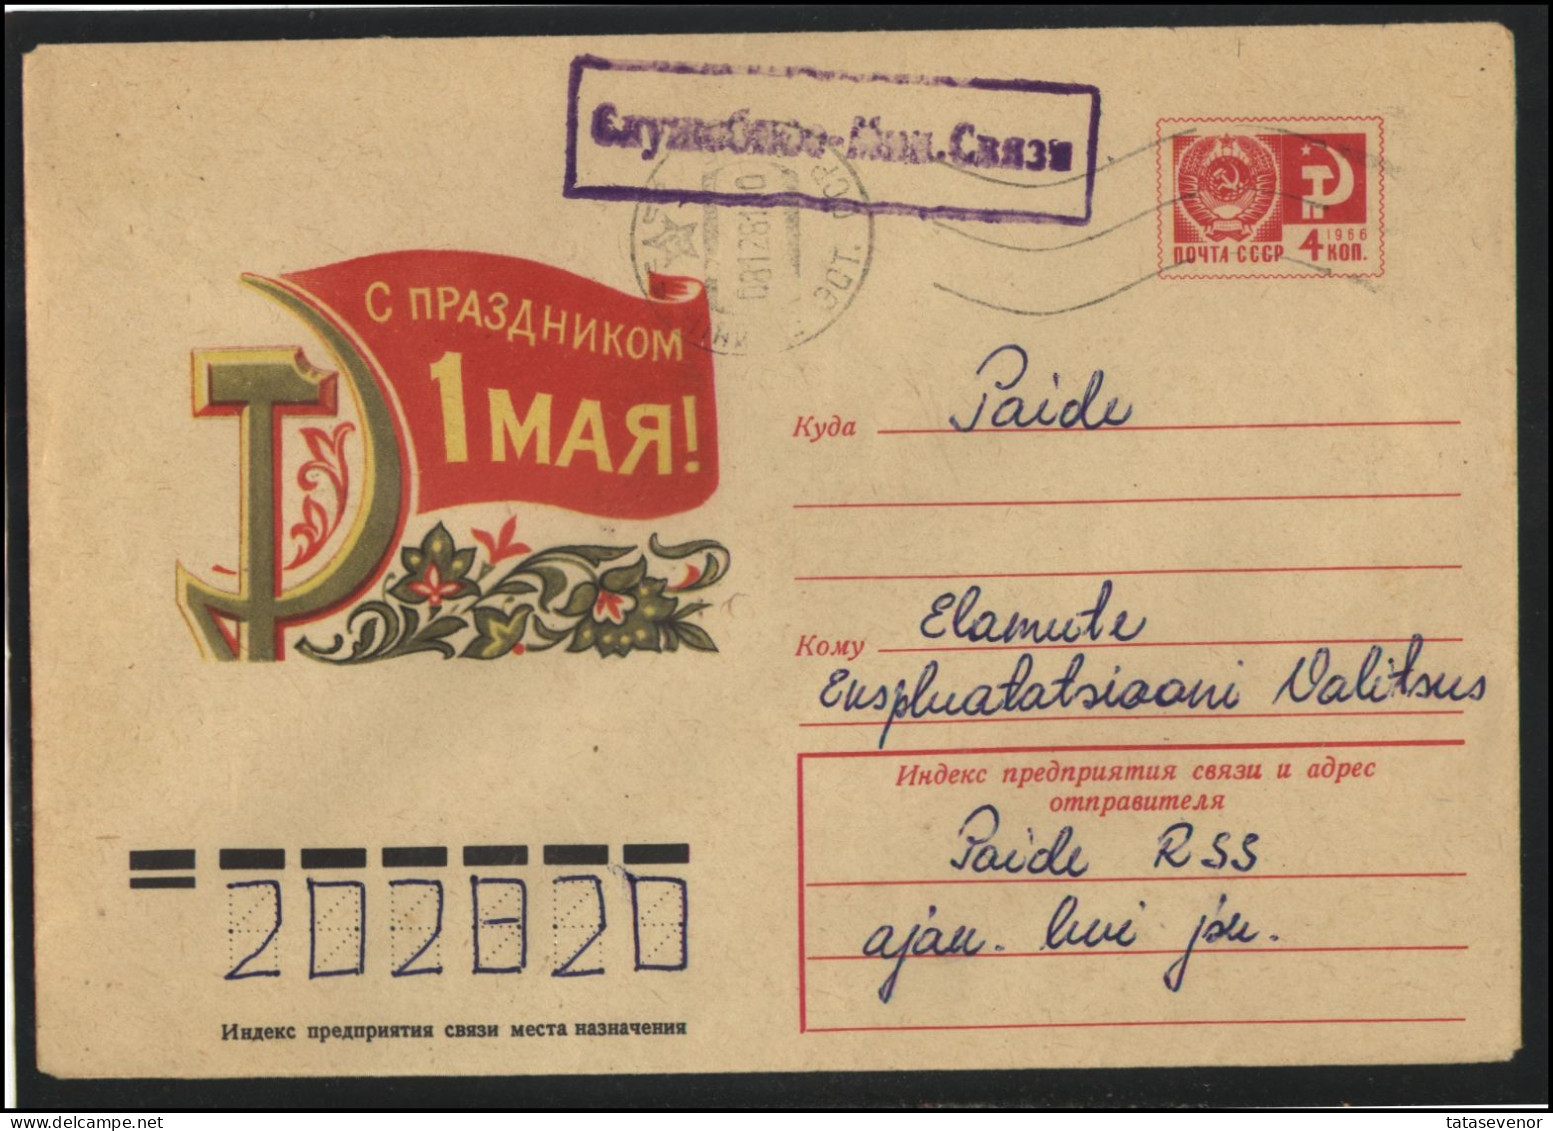 RUSSIA USSR Stationery ESTONIA USED AMBL 1380 PAIDE May Day Celebration - Unclassified